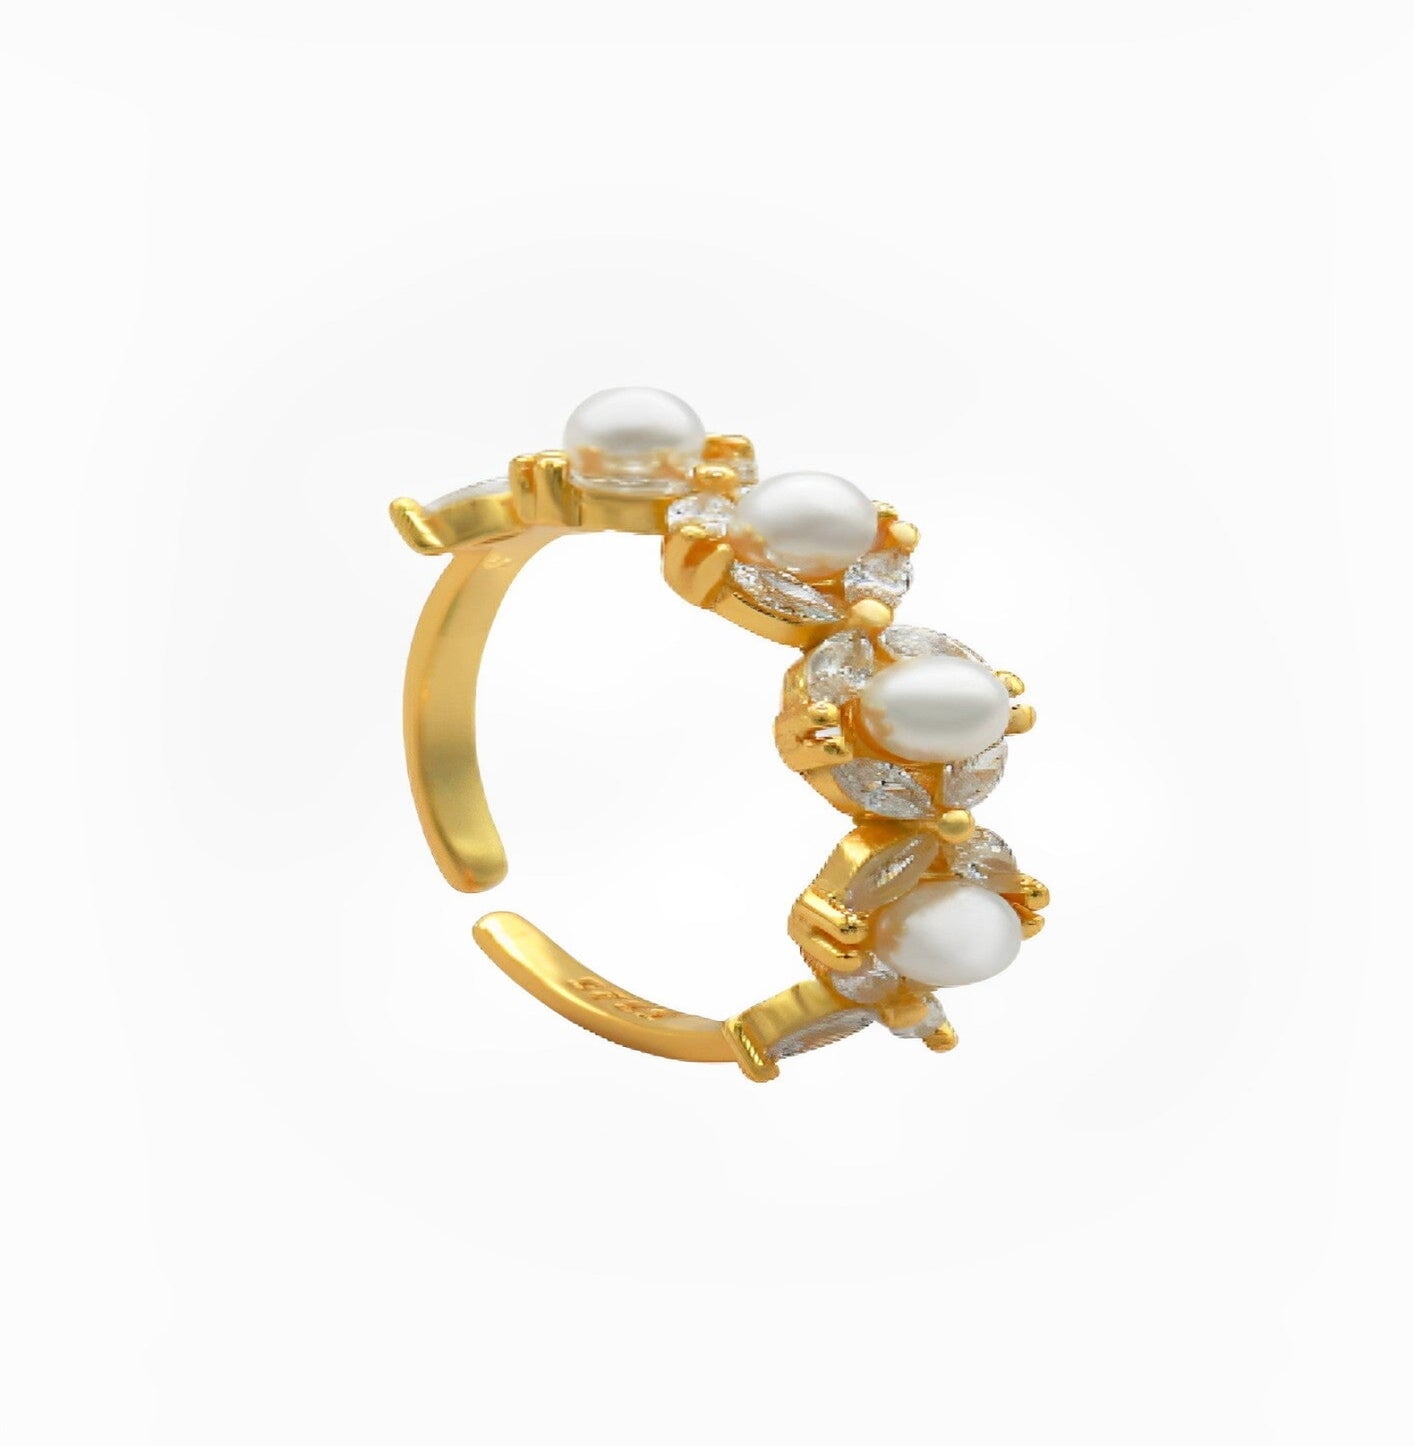 NOELLE RING earing Yubama Jewelry Online Store - The Elegant Designs of Gold and Silver ! 